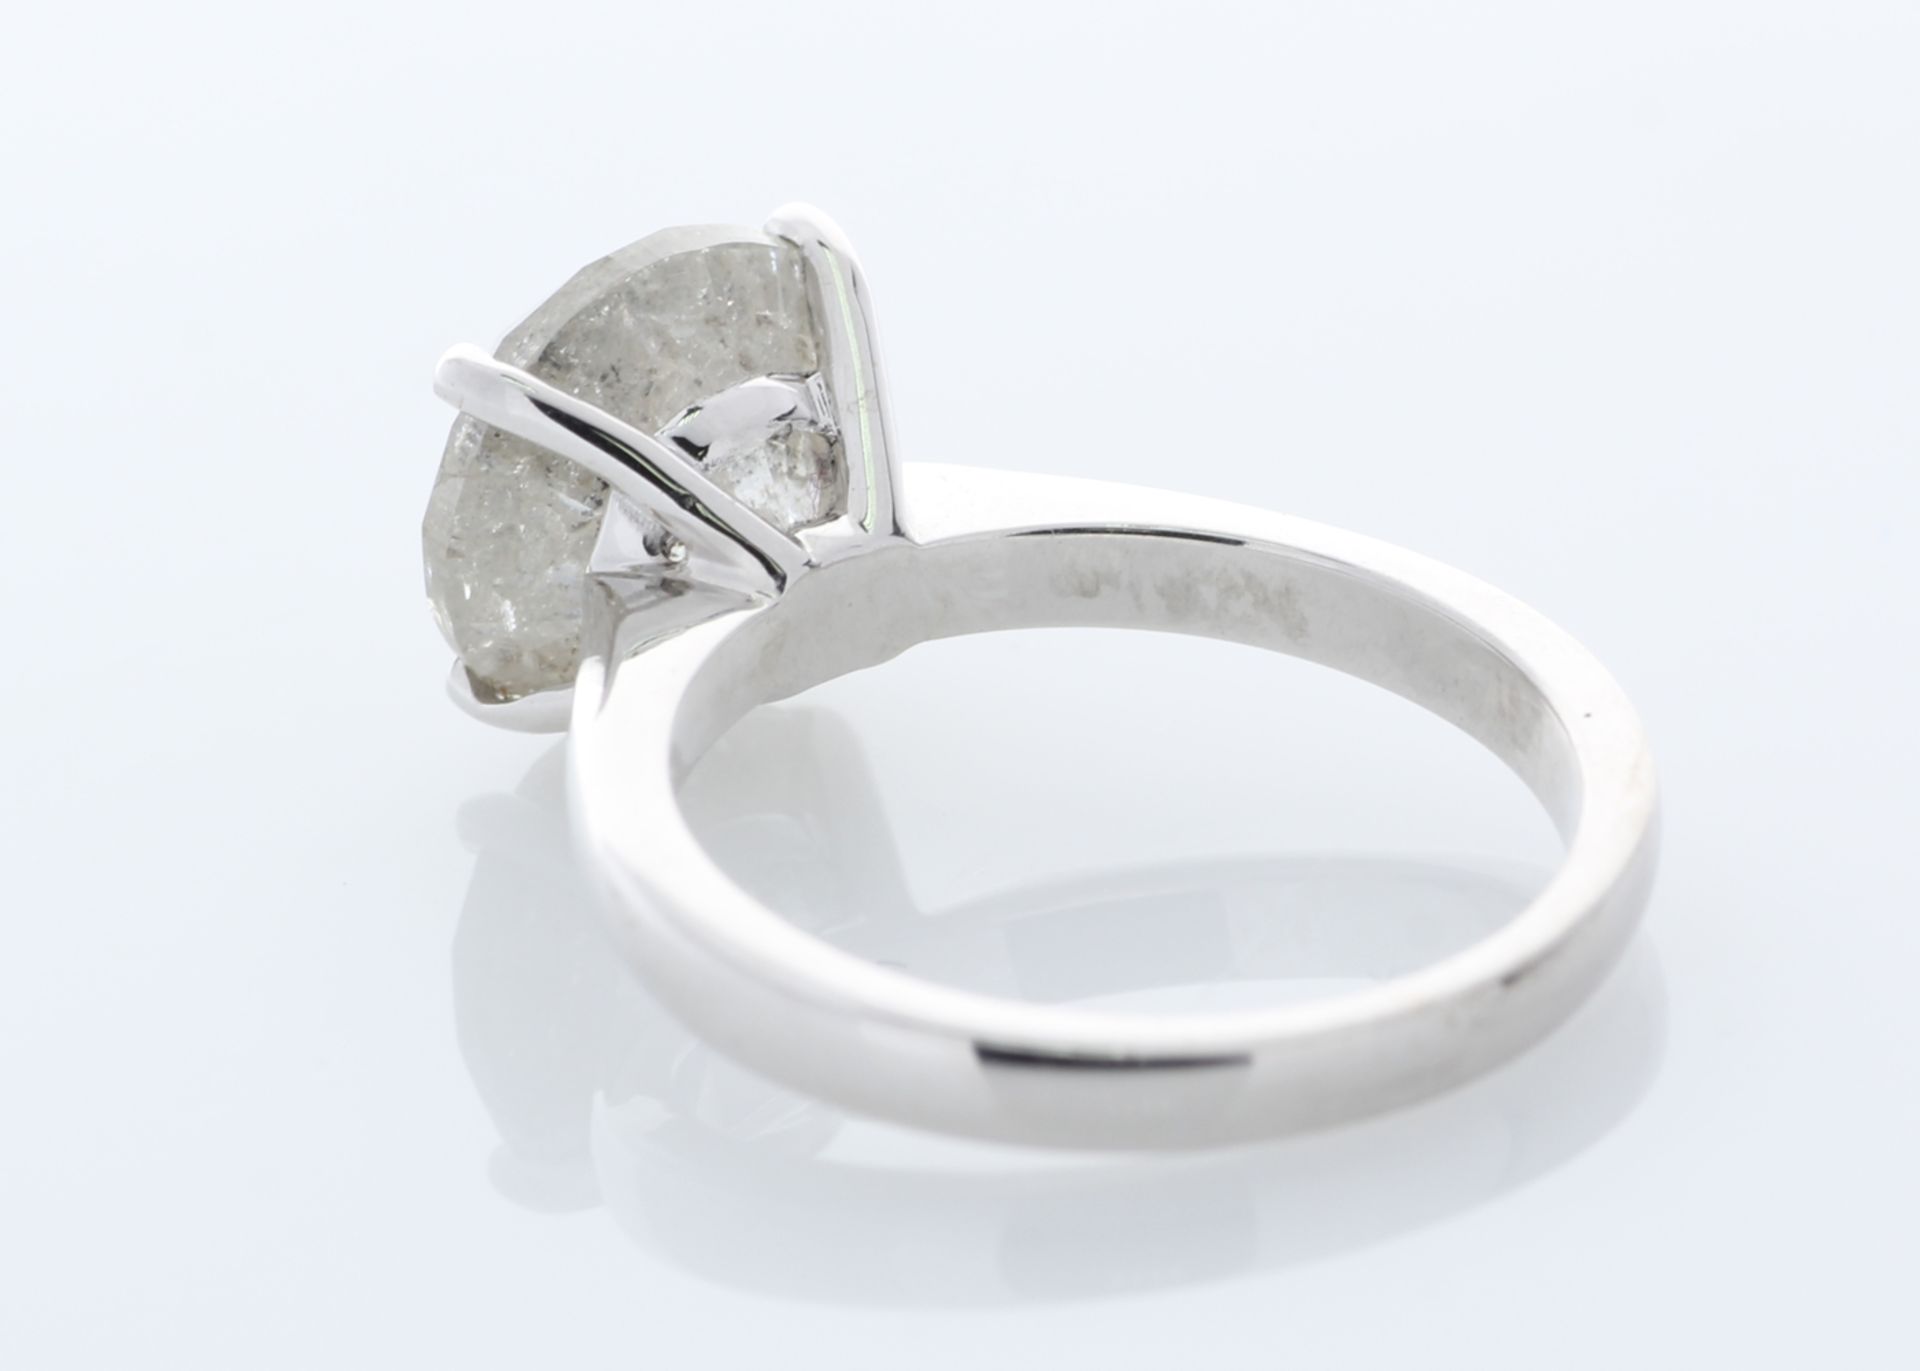 18ct White Gold Single Stone Prong Set Diamond Ring 5.00 Carats - Valued by GIE £56,150.00 - 18ct - Image 4 of 8